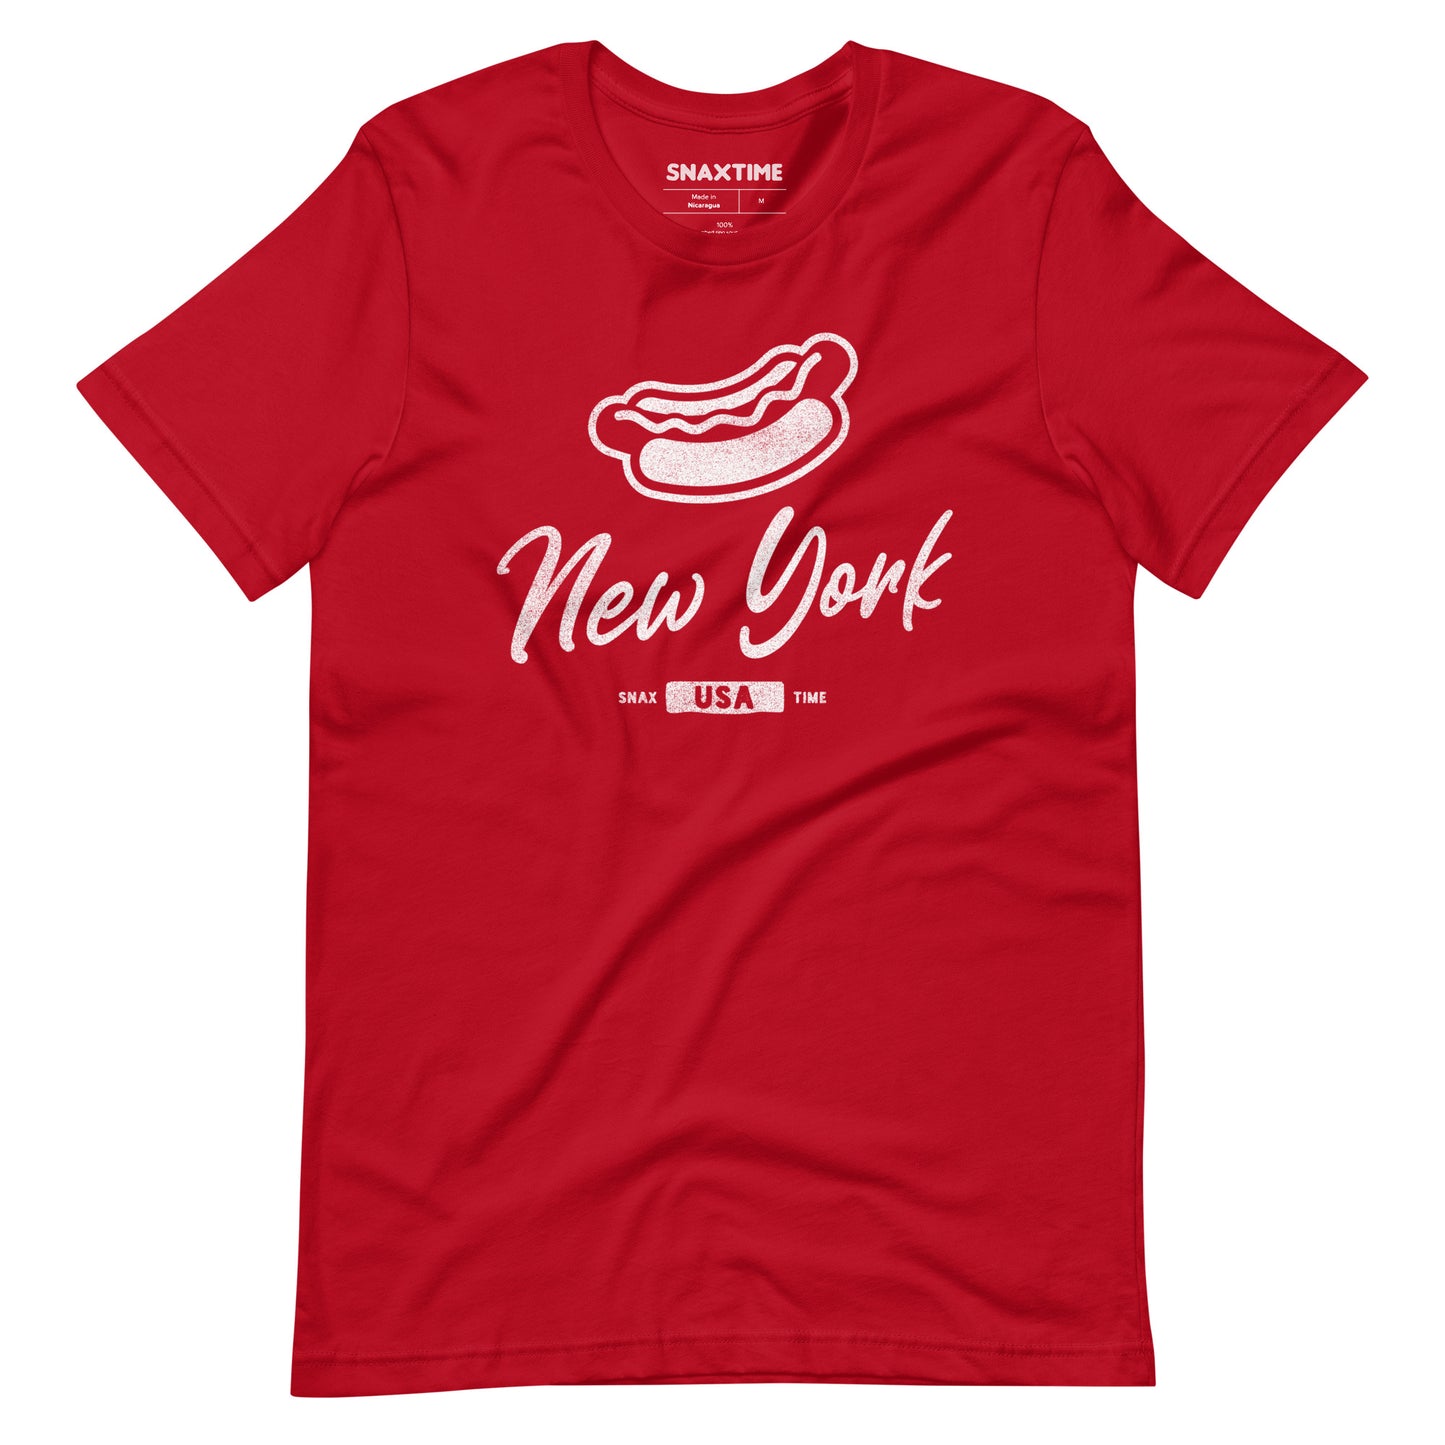 Red New York City Hot Dog Graphic T-Shirt by Snaxtime